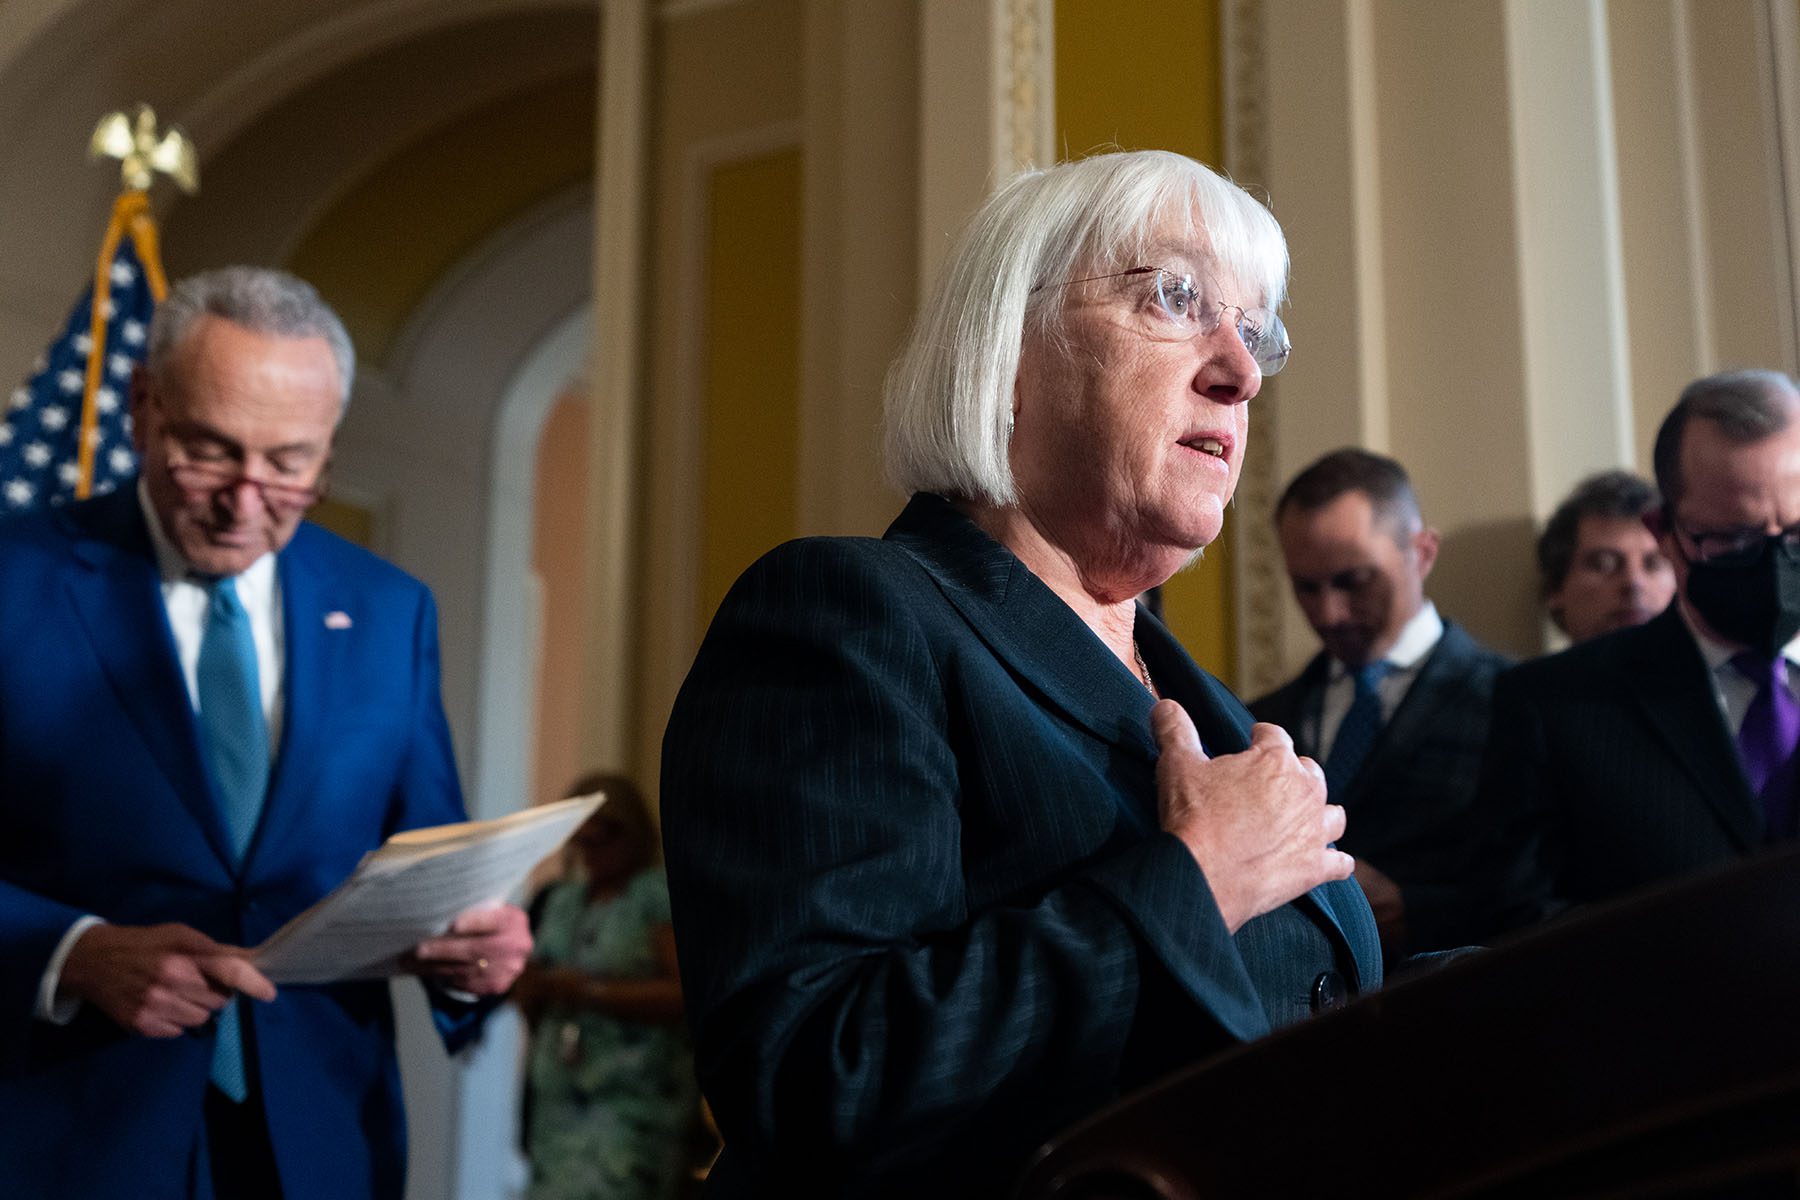 Sen. Patty Murray speaks during the Senate Democrats press conference on Capitol Hill.